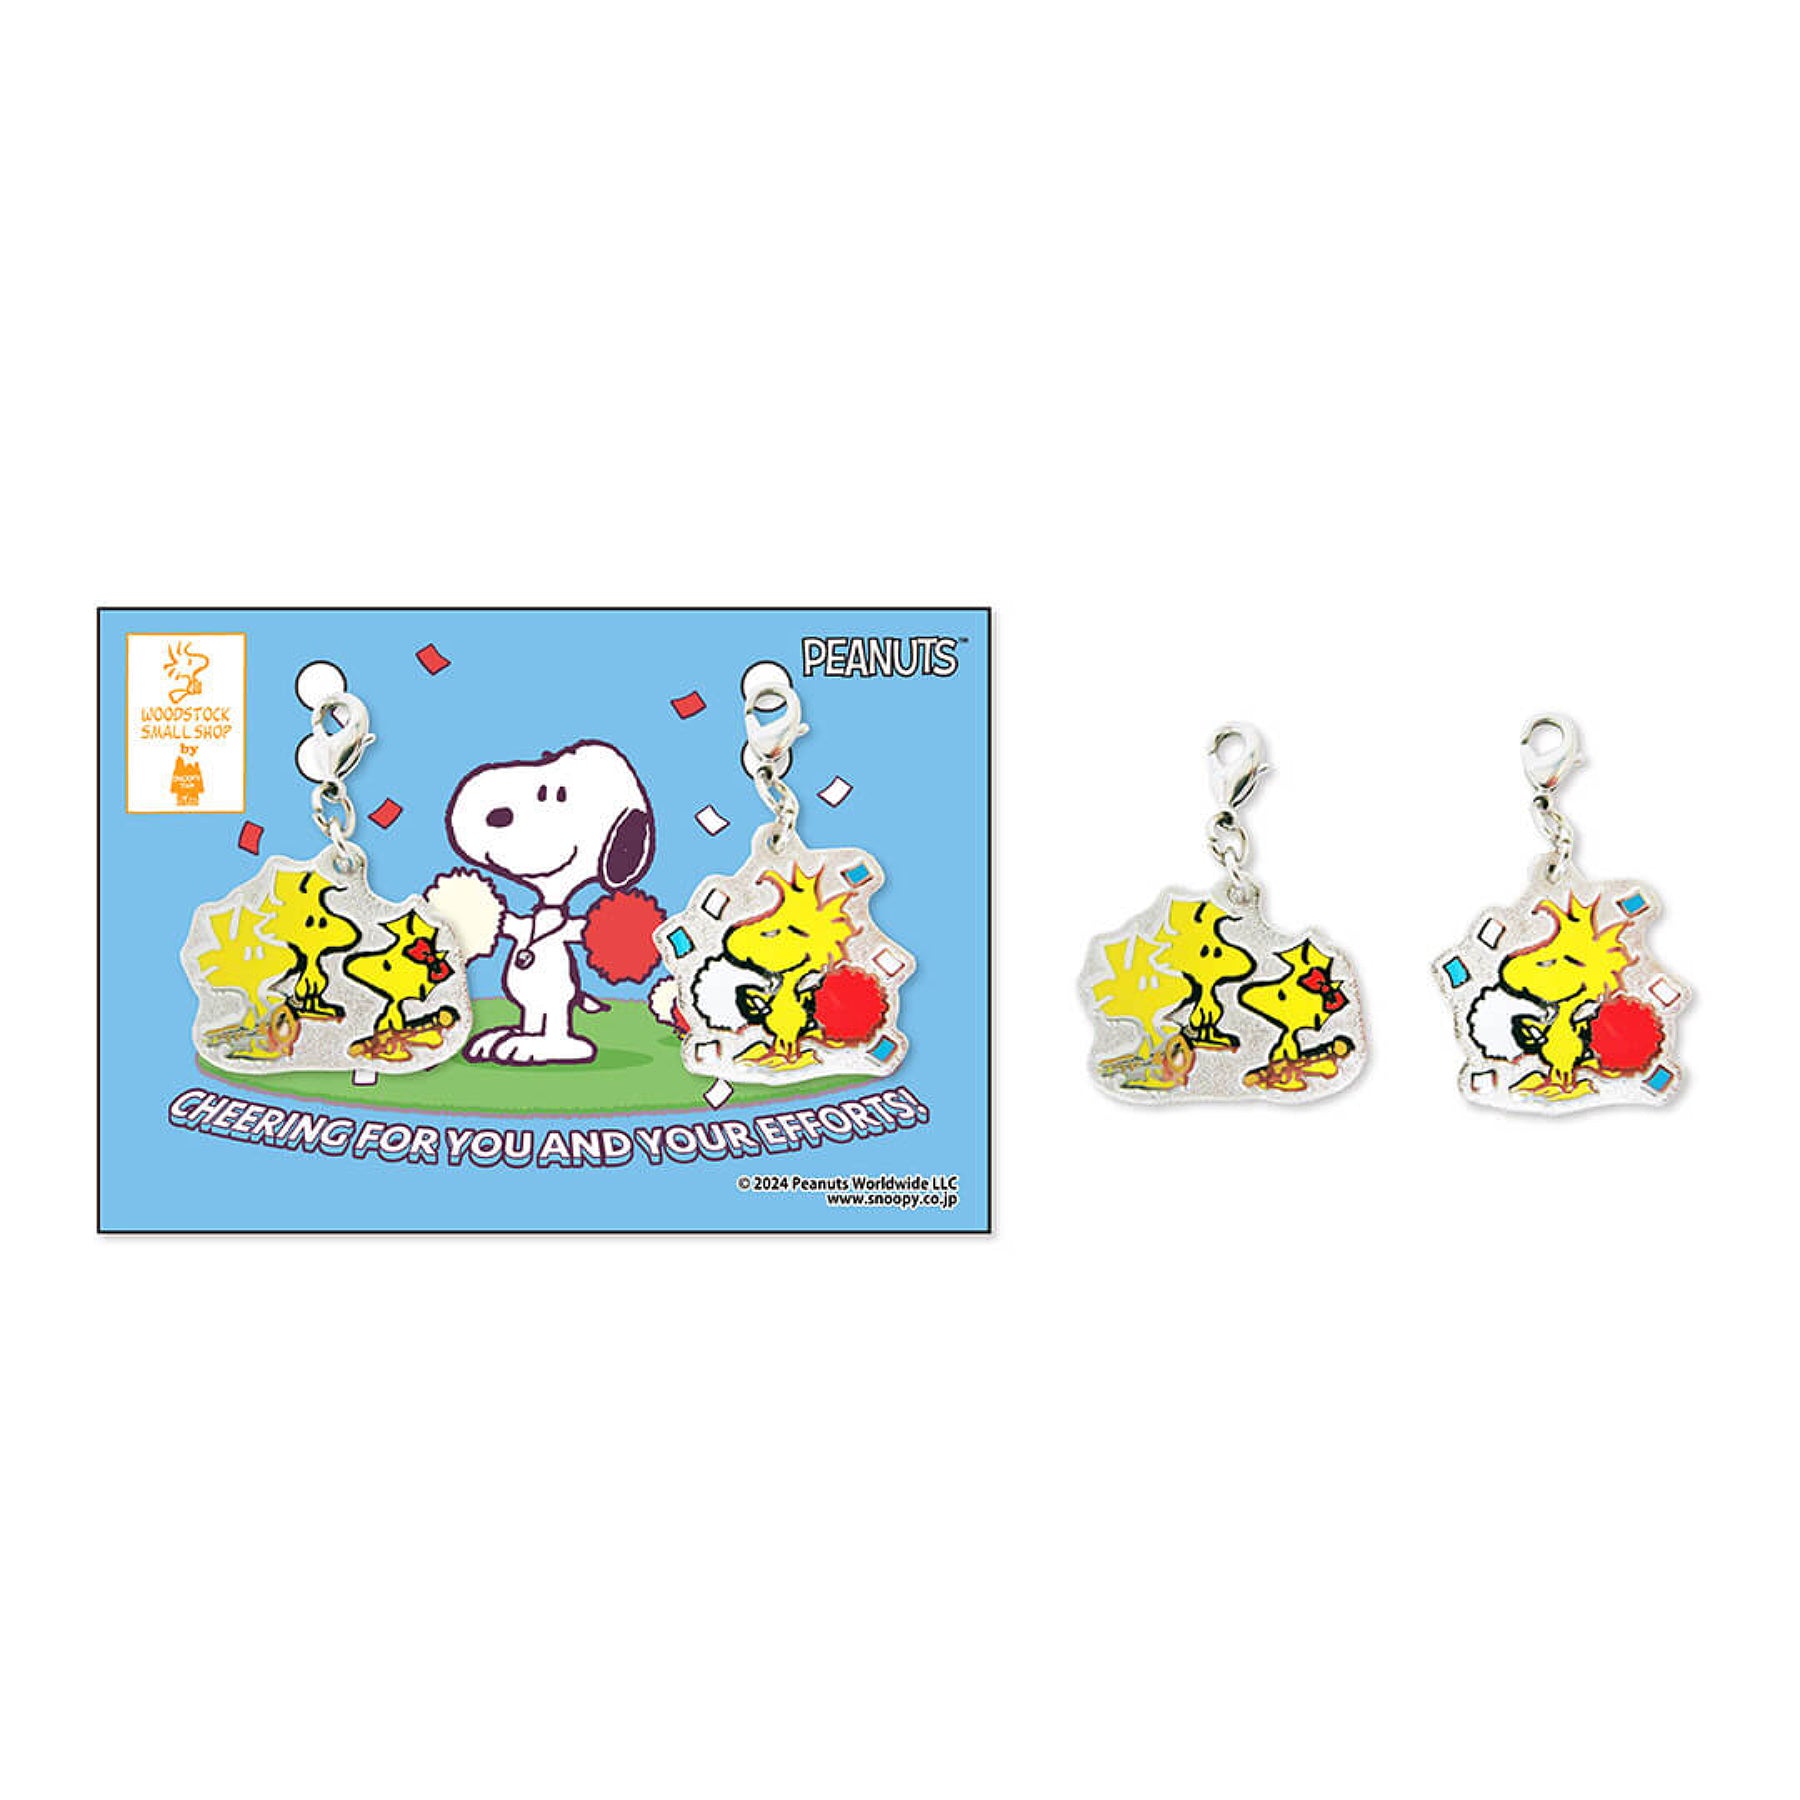 Woodstock Fair「CHEERING FOR YOU AND YOUR EFFORTS!」- Charm Set